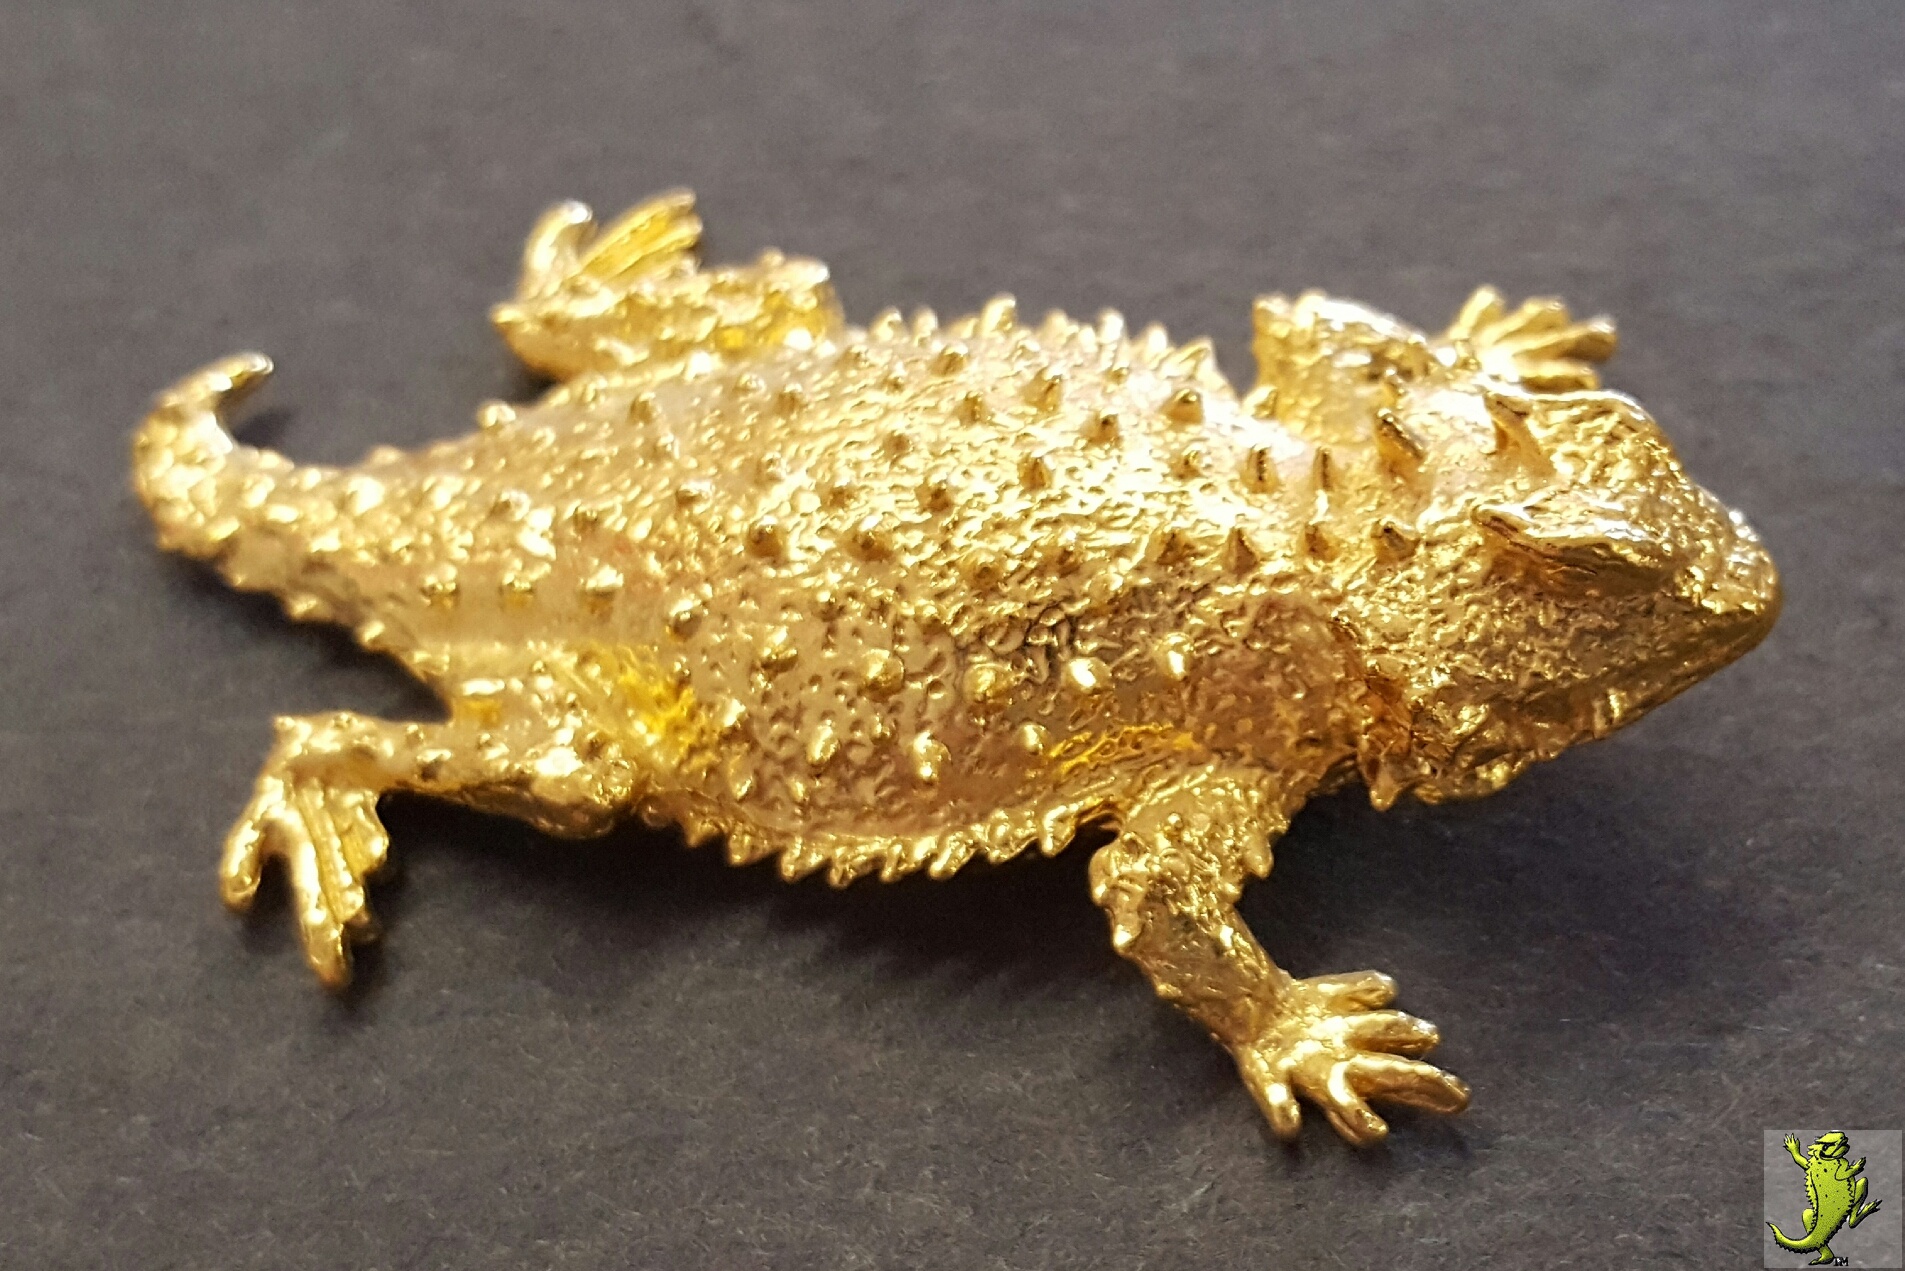 Horny Toad Paperweight - 3" Short Horned